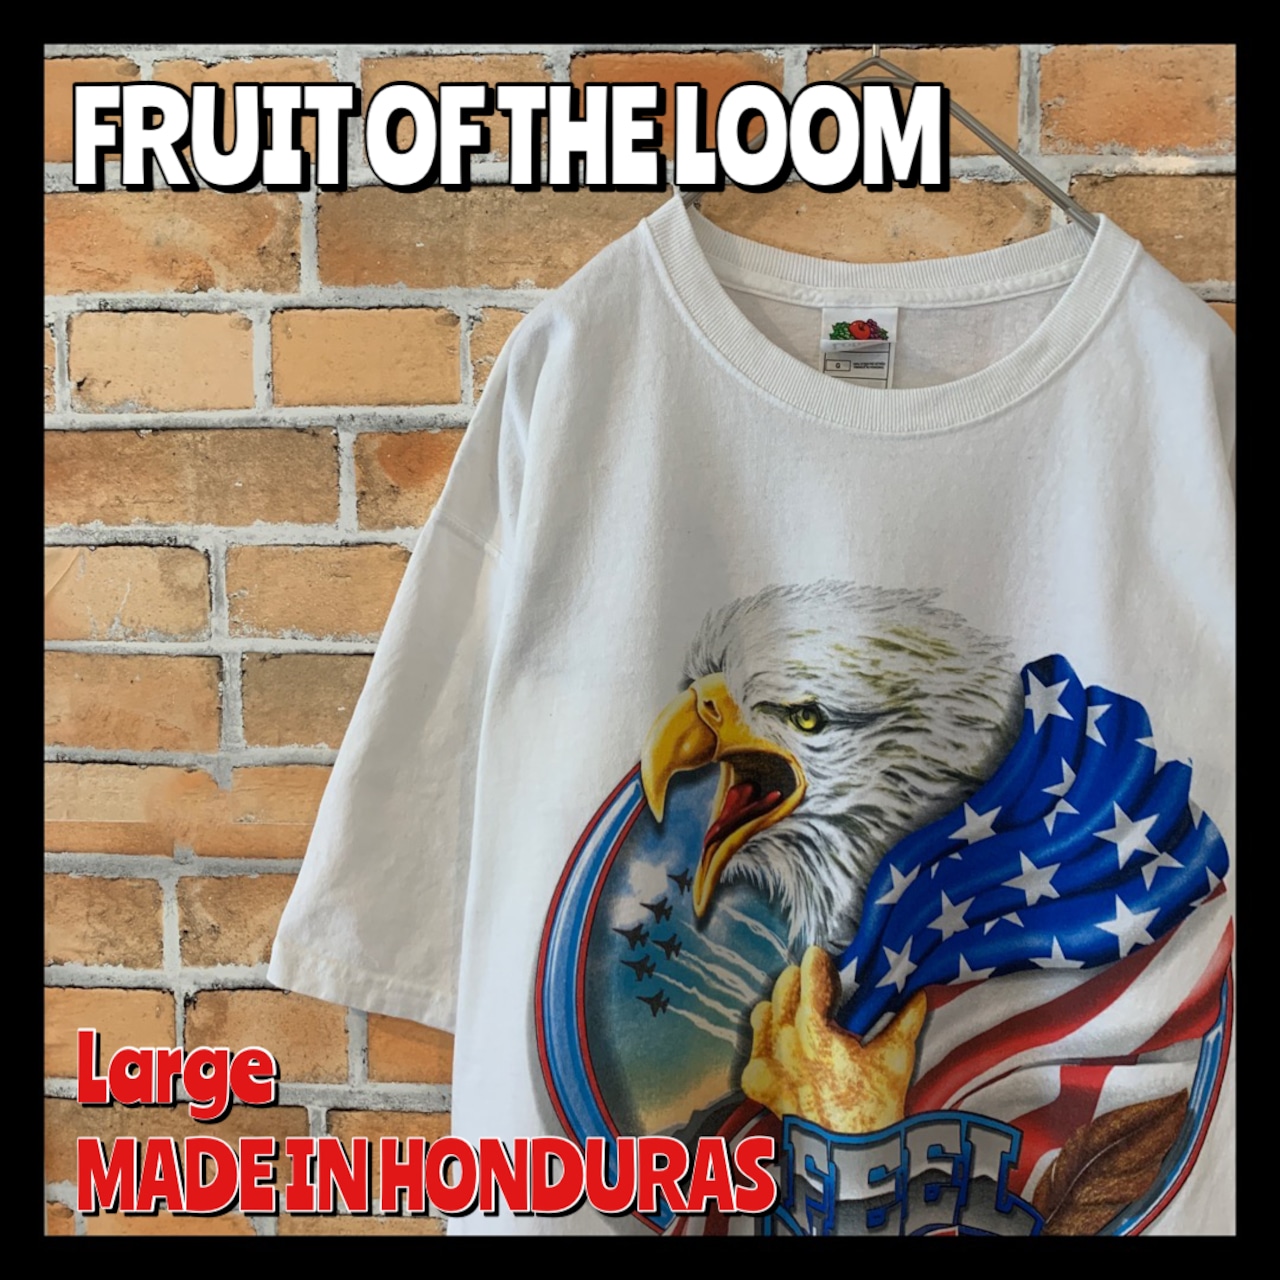 【FRUIT OF THE LOOM】 両面ビッグプリント Tシャツ USA古着 バックプリント